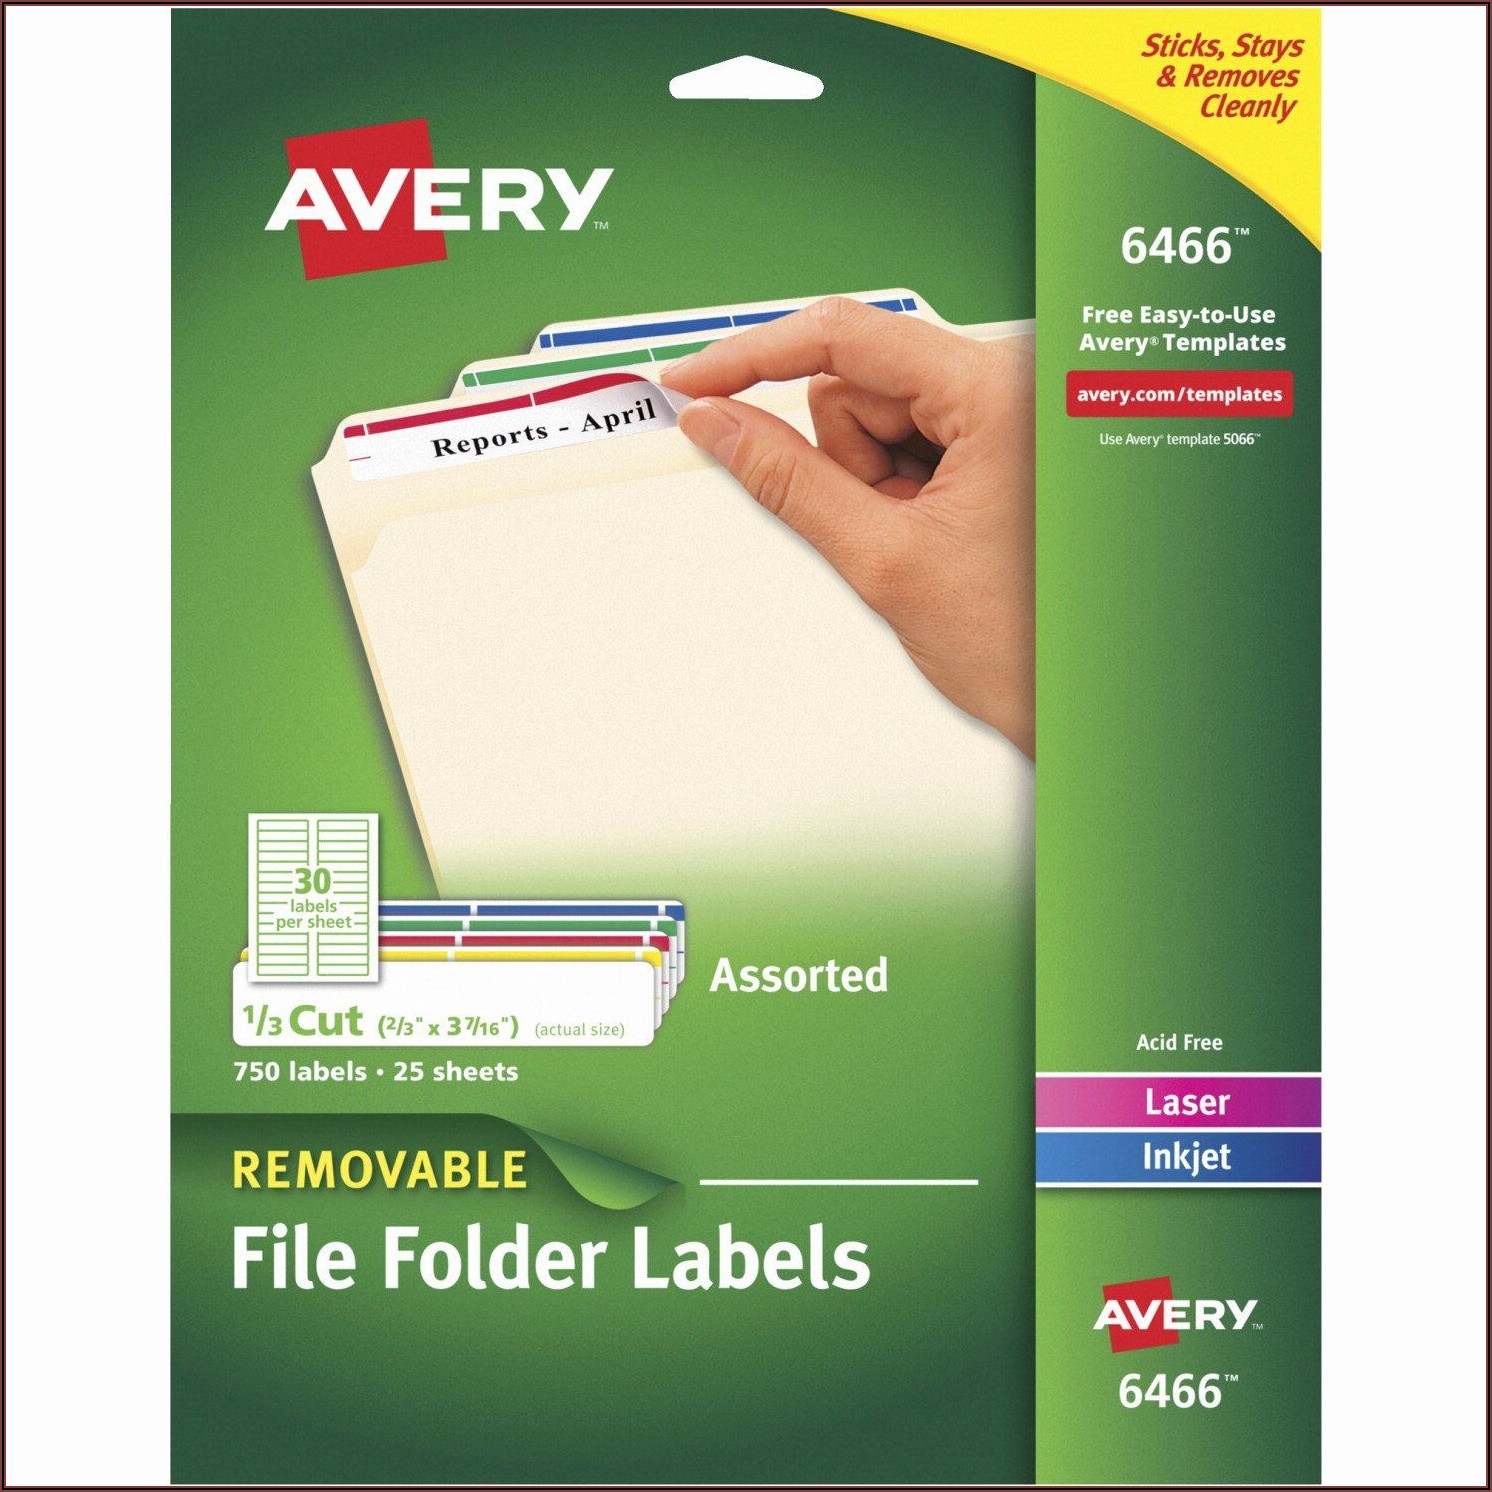 Avery File Label Template